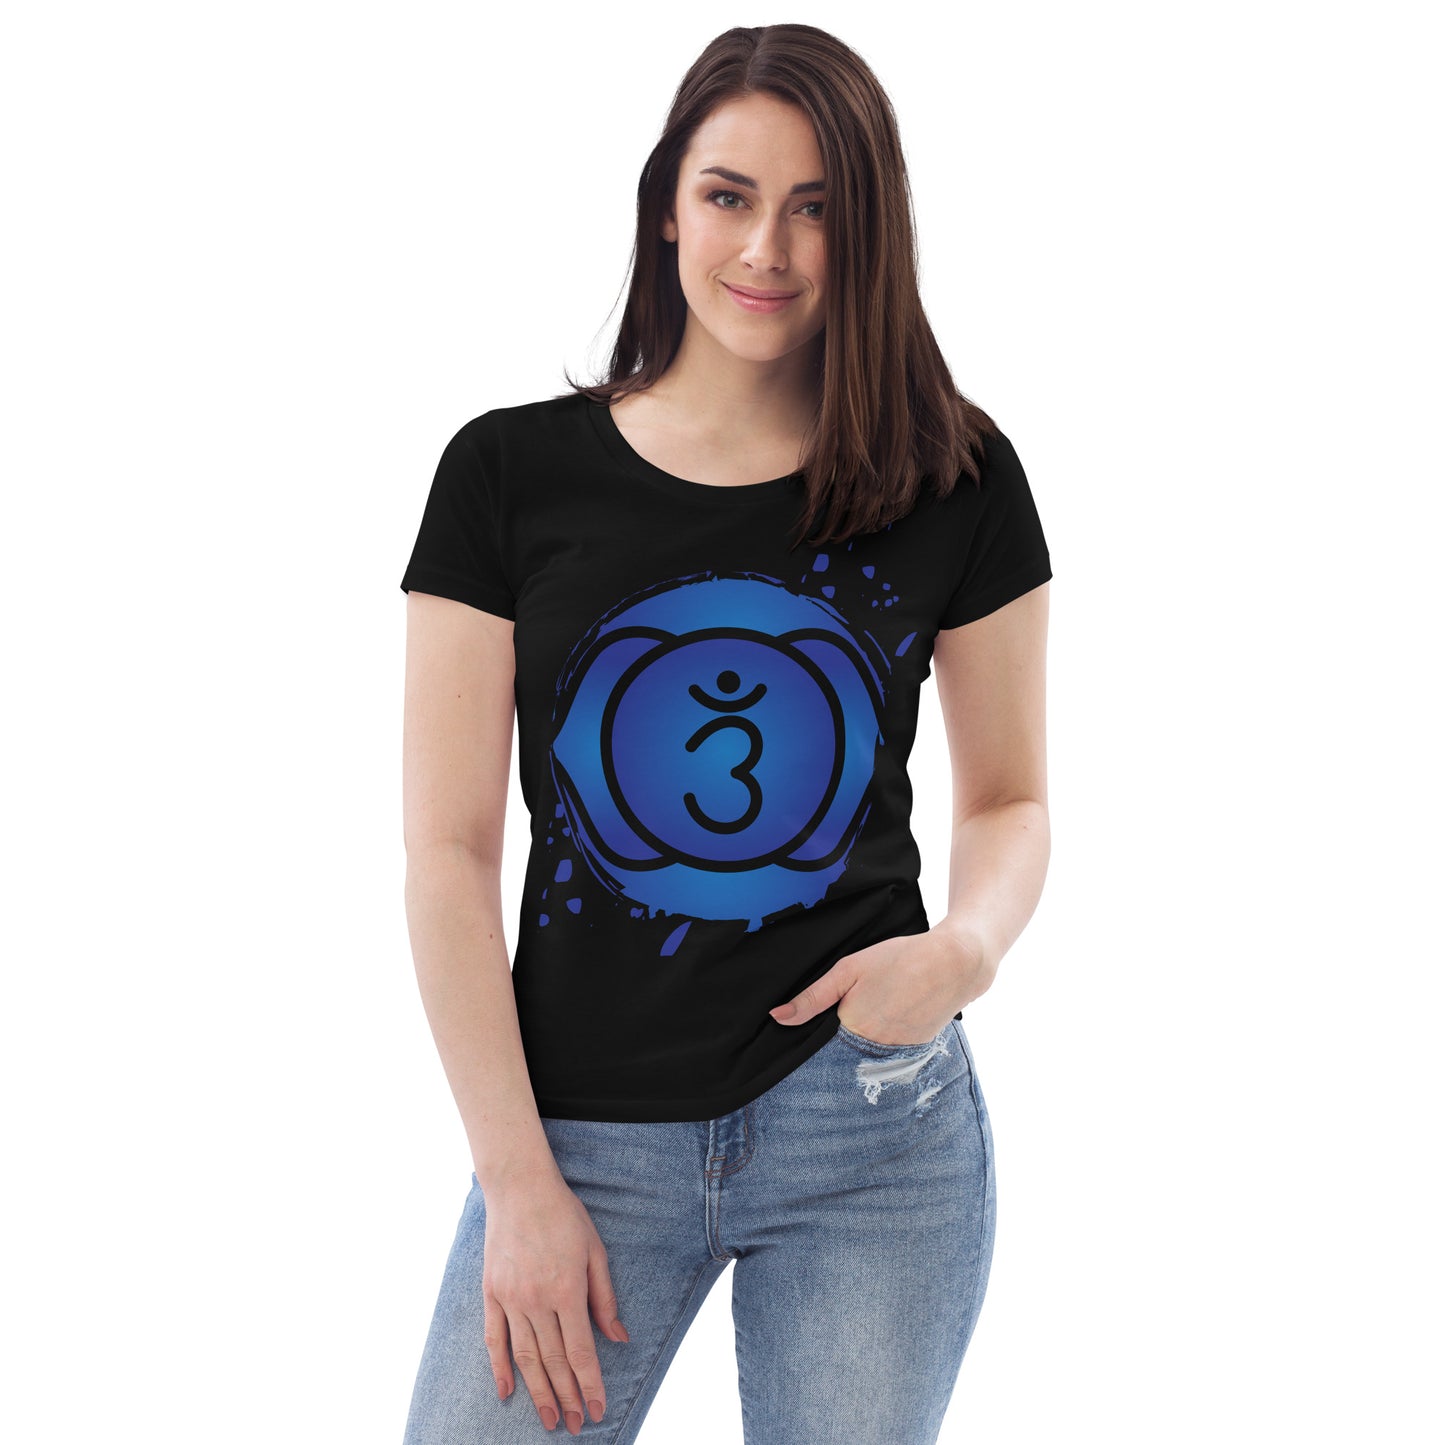 Women's fitted eco tee S-2XL | Ajna chakra